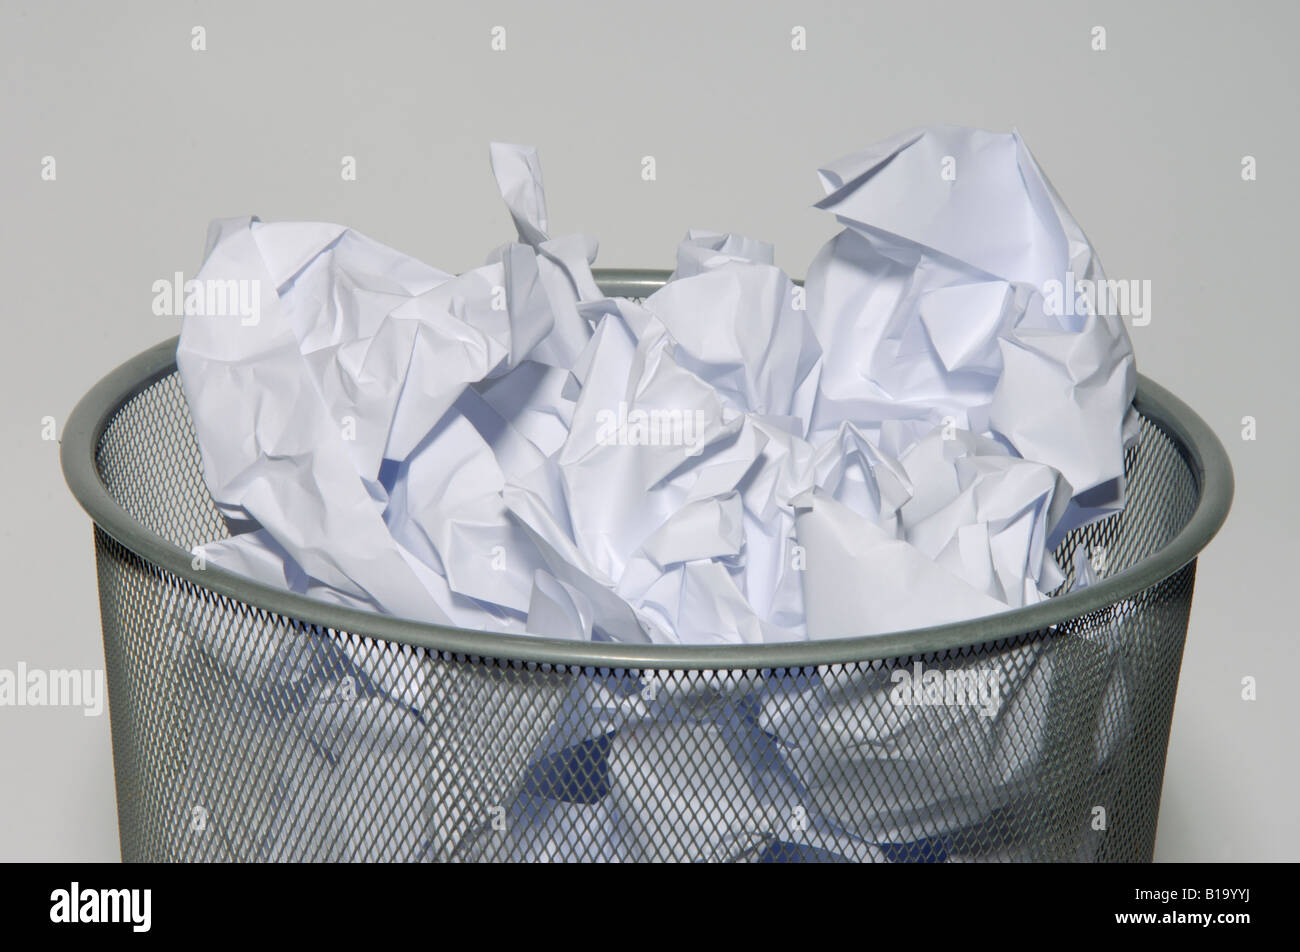 Waste paper bin full with crumpled document paper Stock Photo